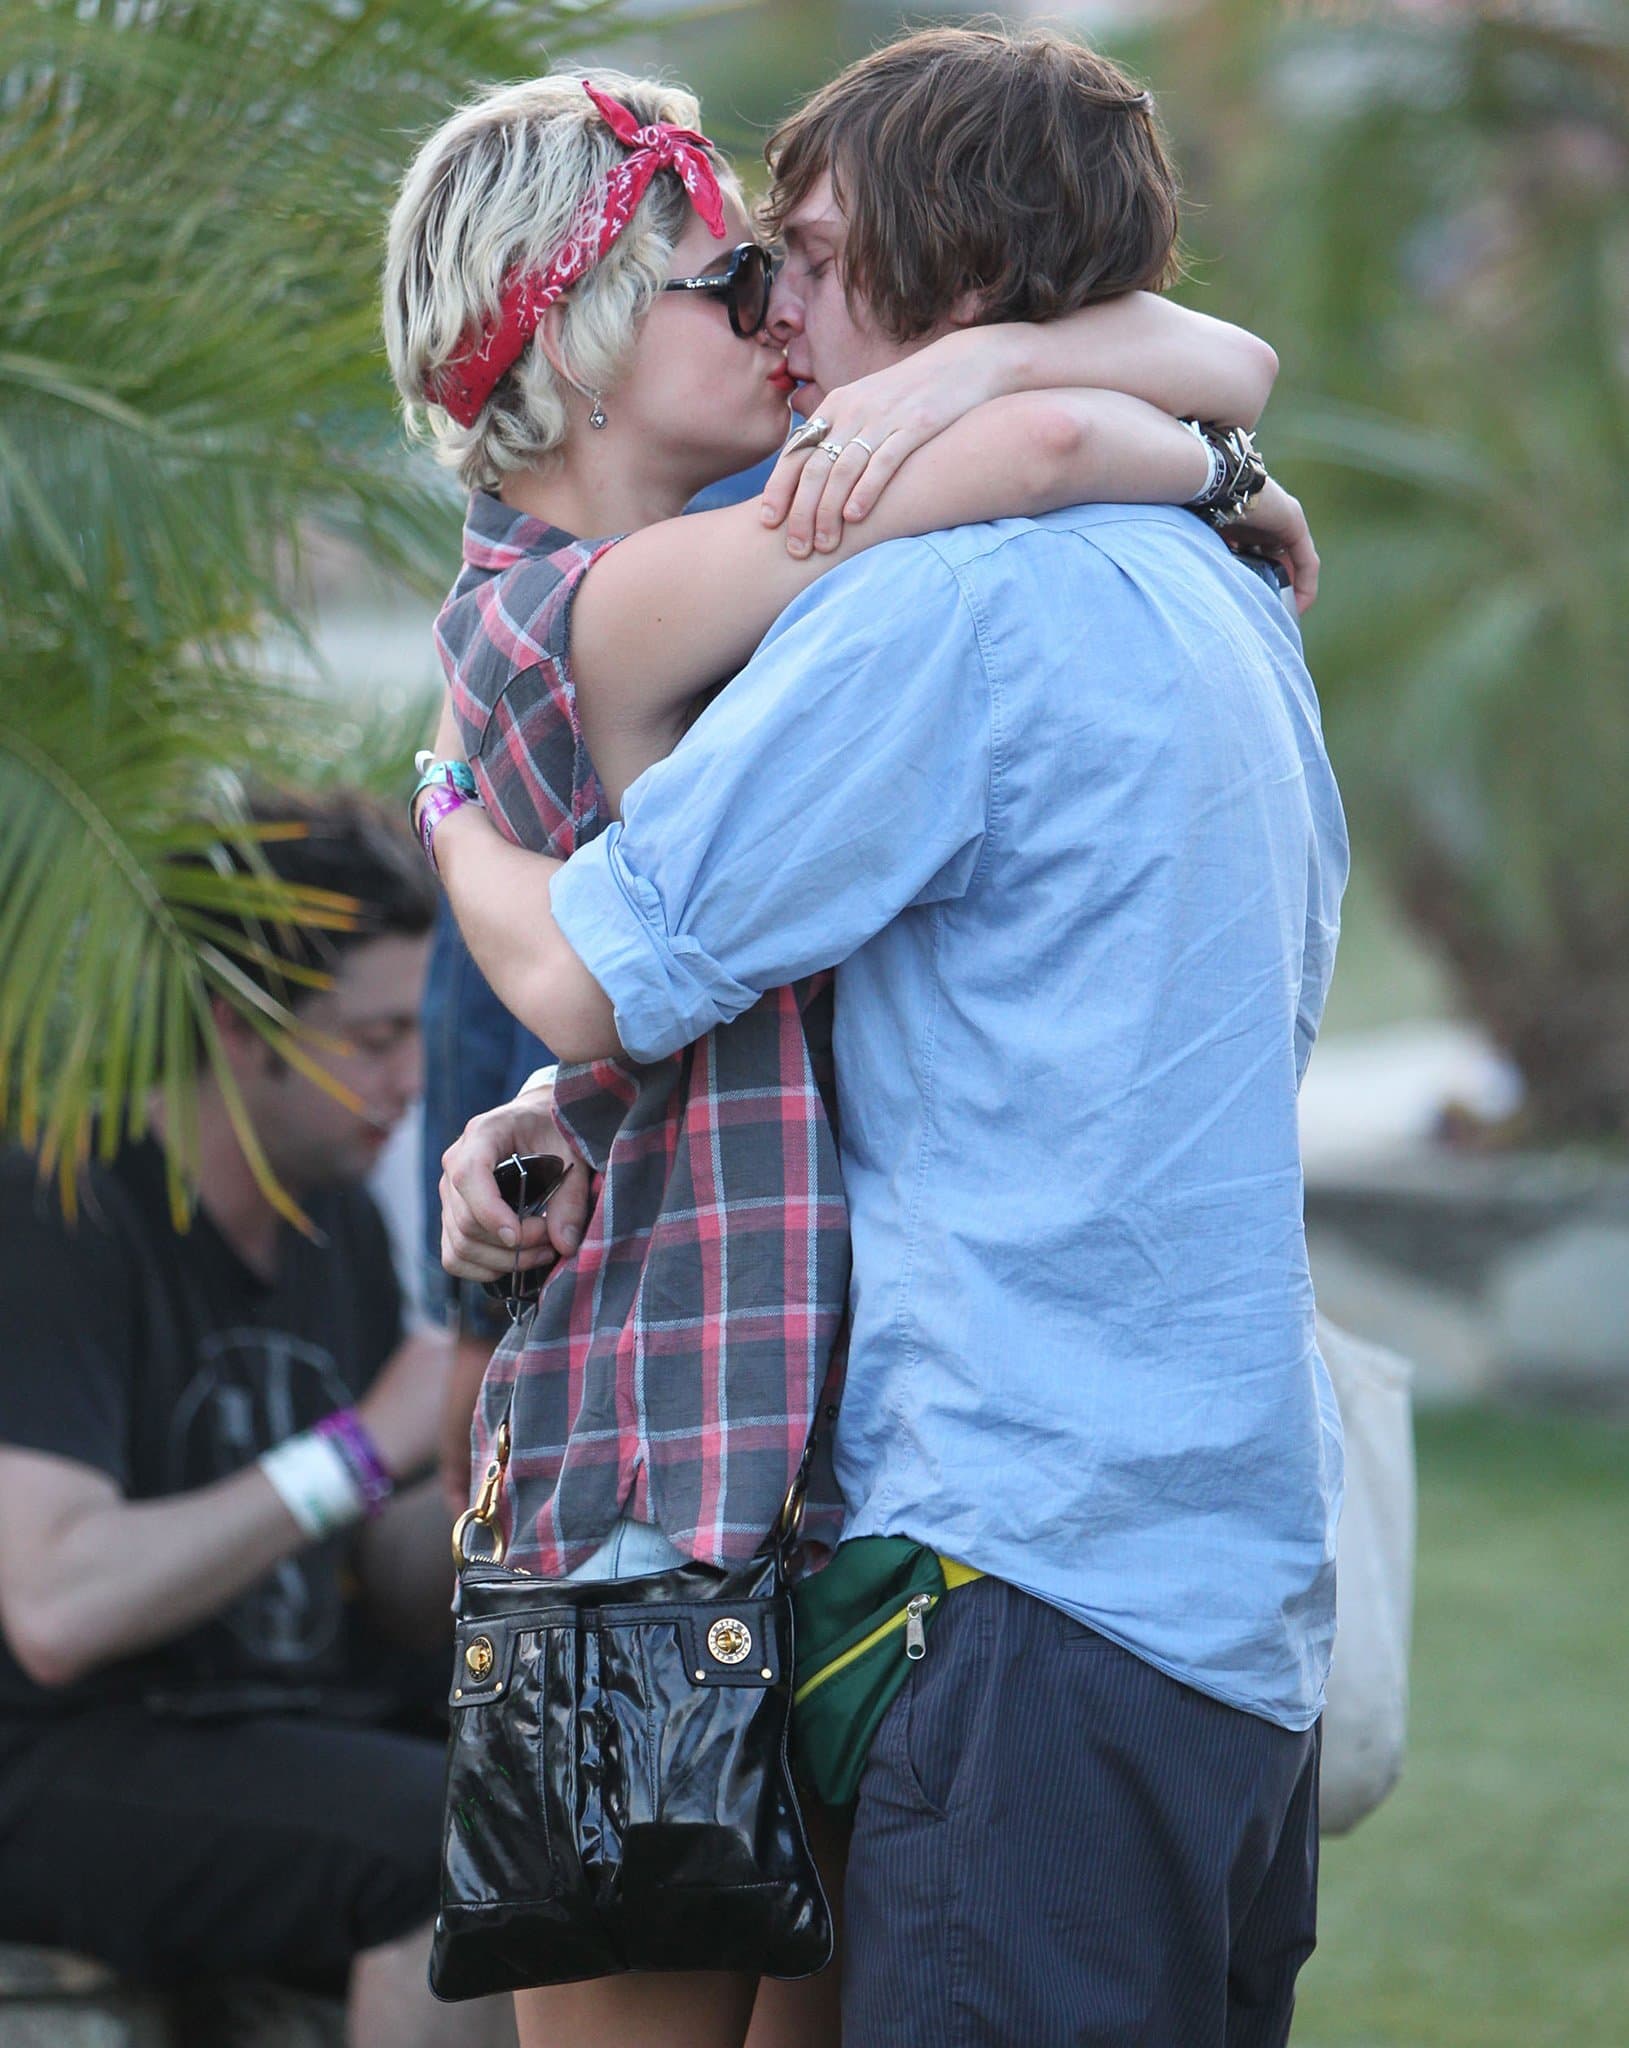 Pixie Geldof kissing then-boyfriend Evan Peters at the 2010 Coachella Valley Music and Arts Festival on April 18, 2010